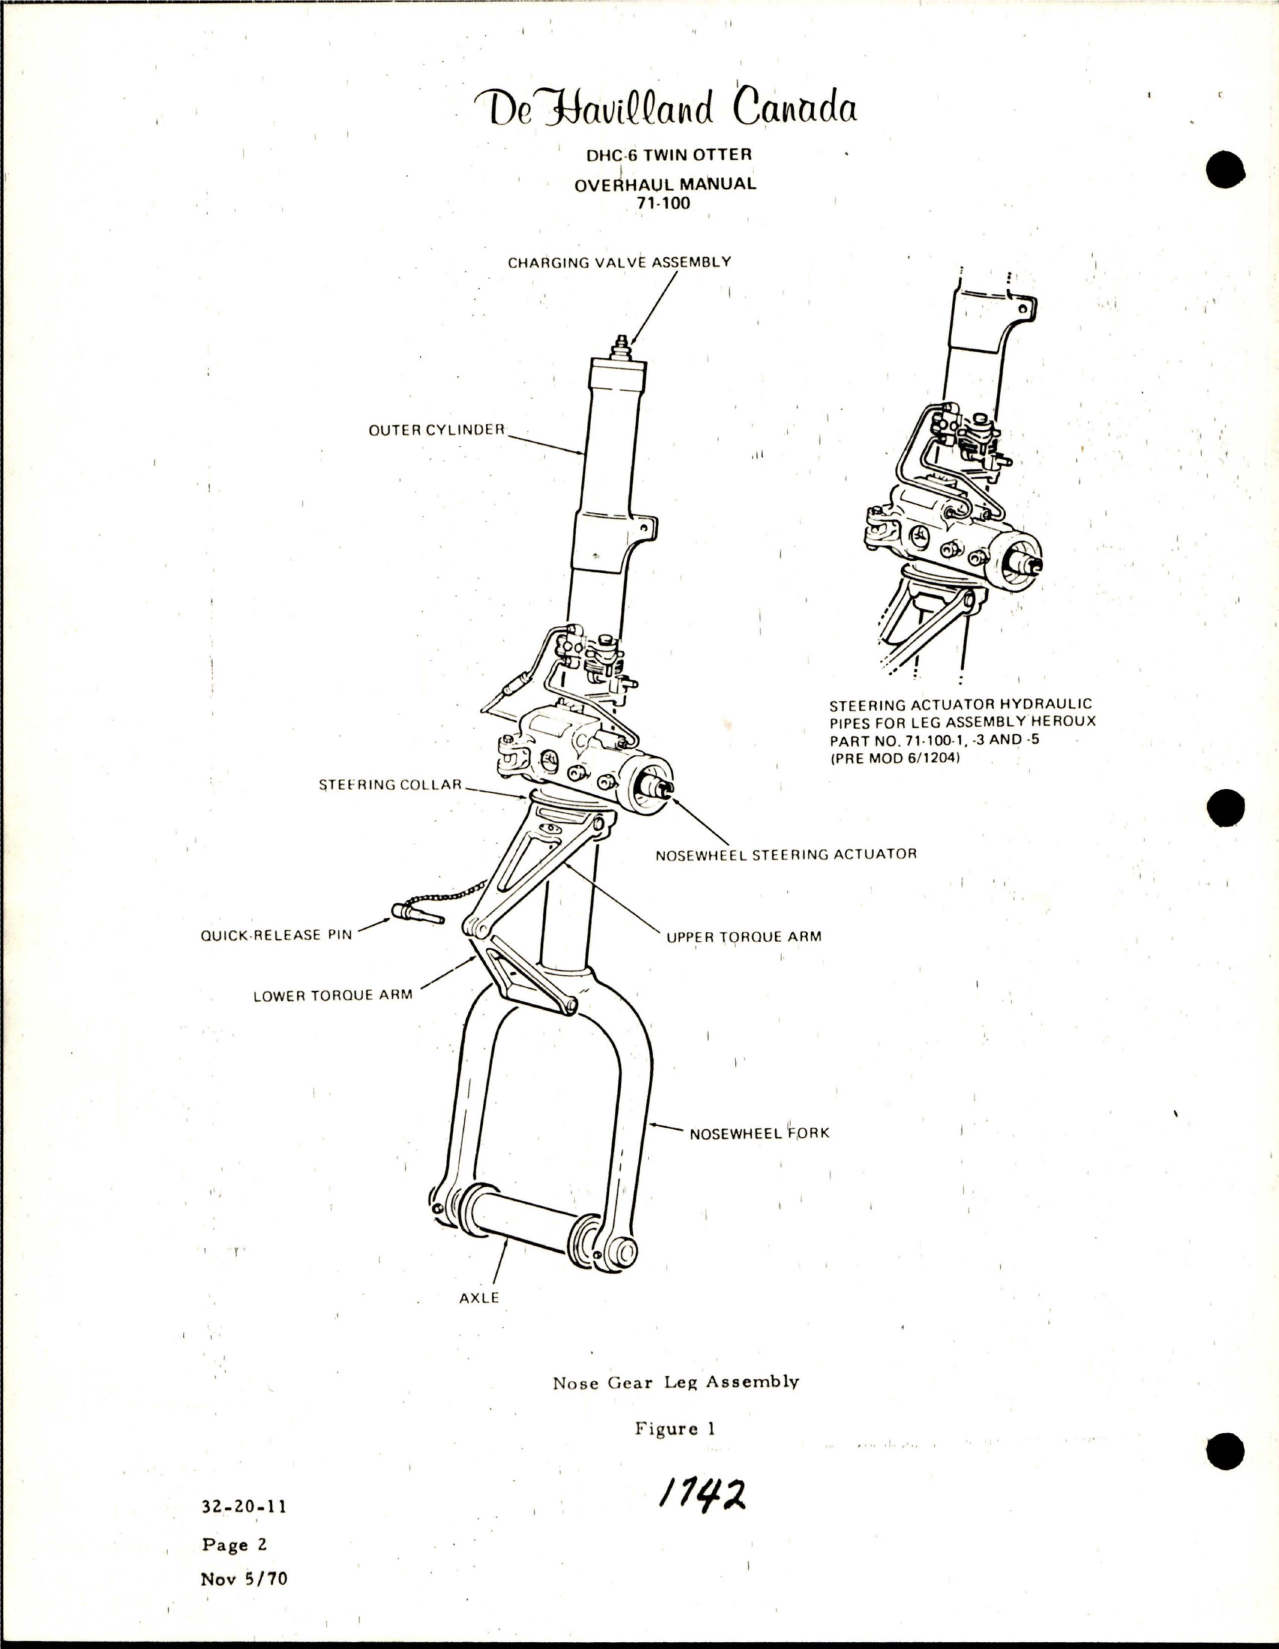 Sample page 8 from AirCorps Library document: Overhaul Manual for DHC-6 Twin Otter Nose Gear Leg Assembly - Part 71-100 